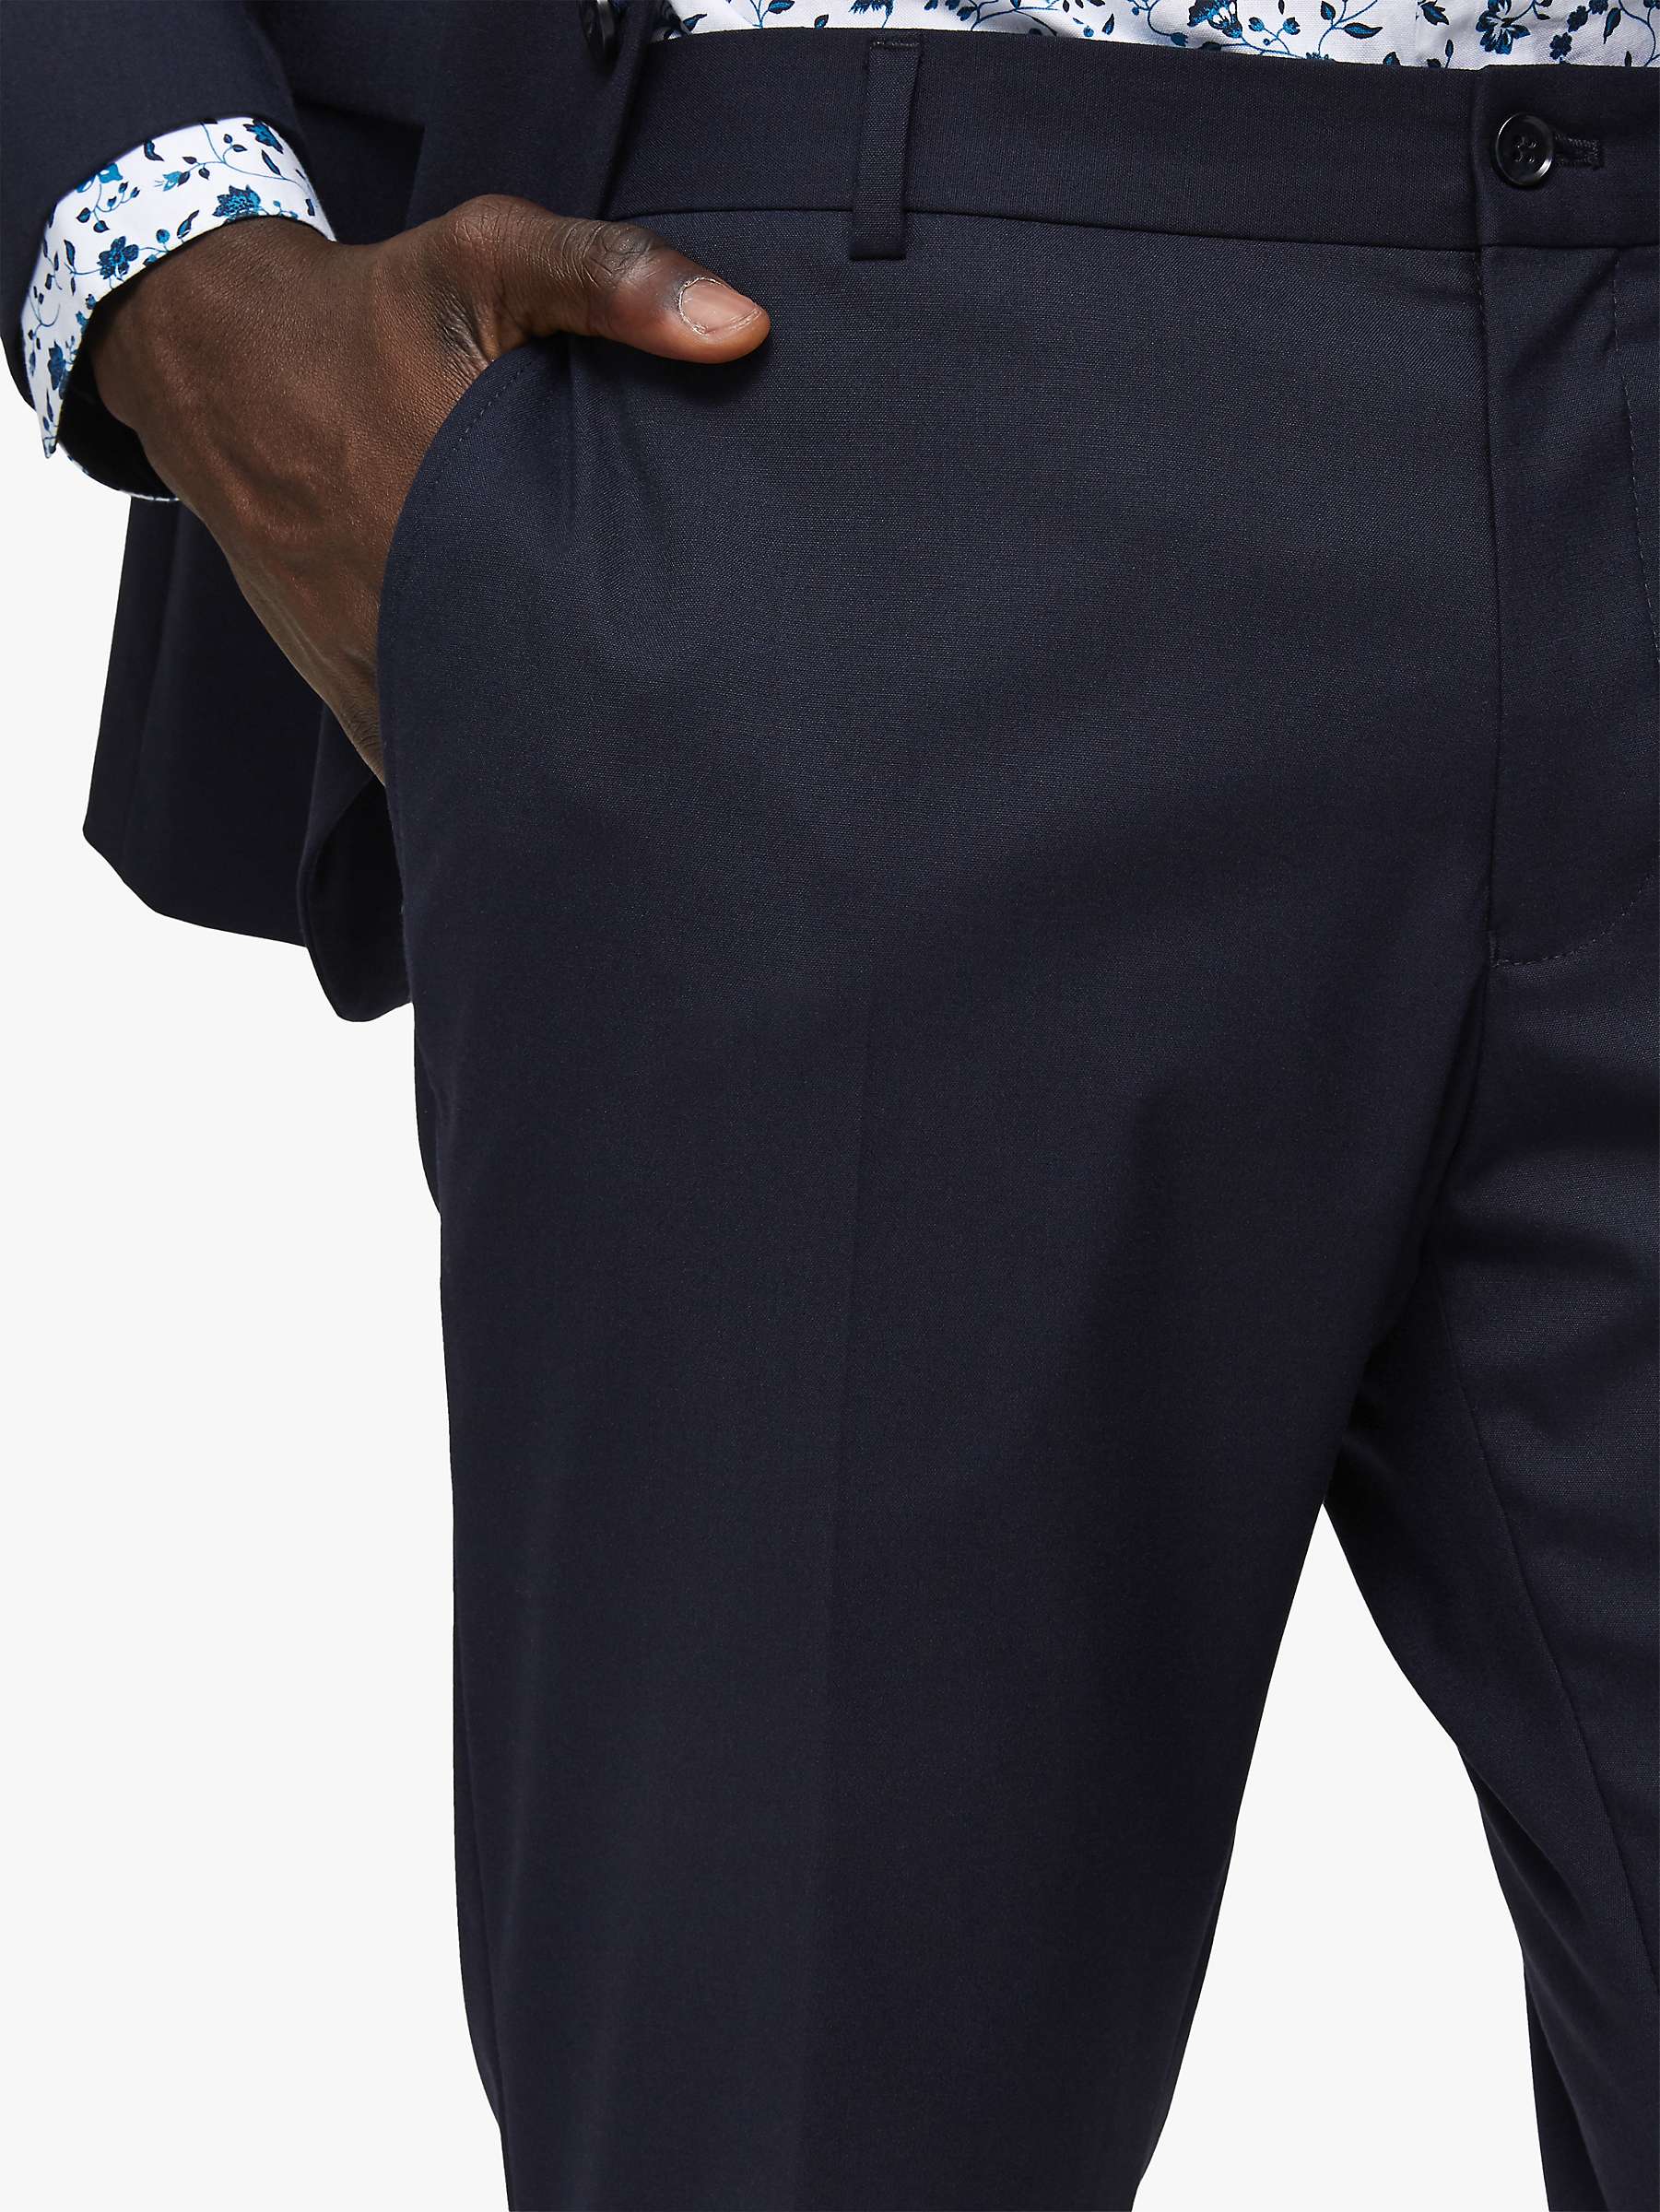 Buy SELECTED HOMME Slim Fit Suit Trousers, Navy Online at johnlewis.com